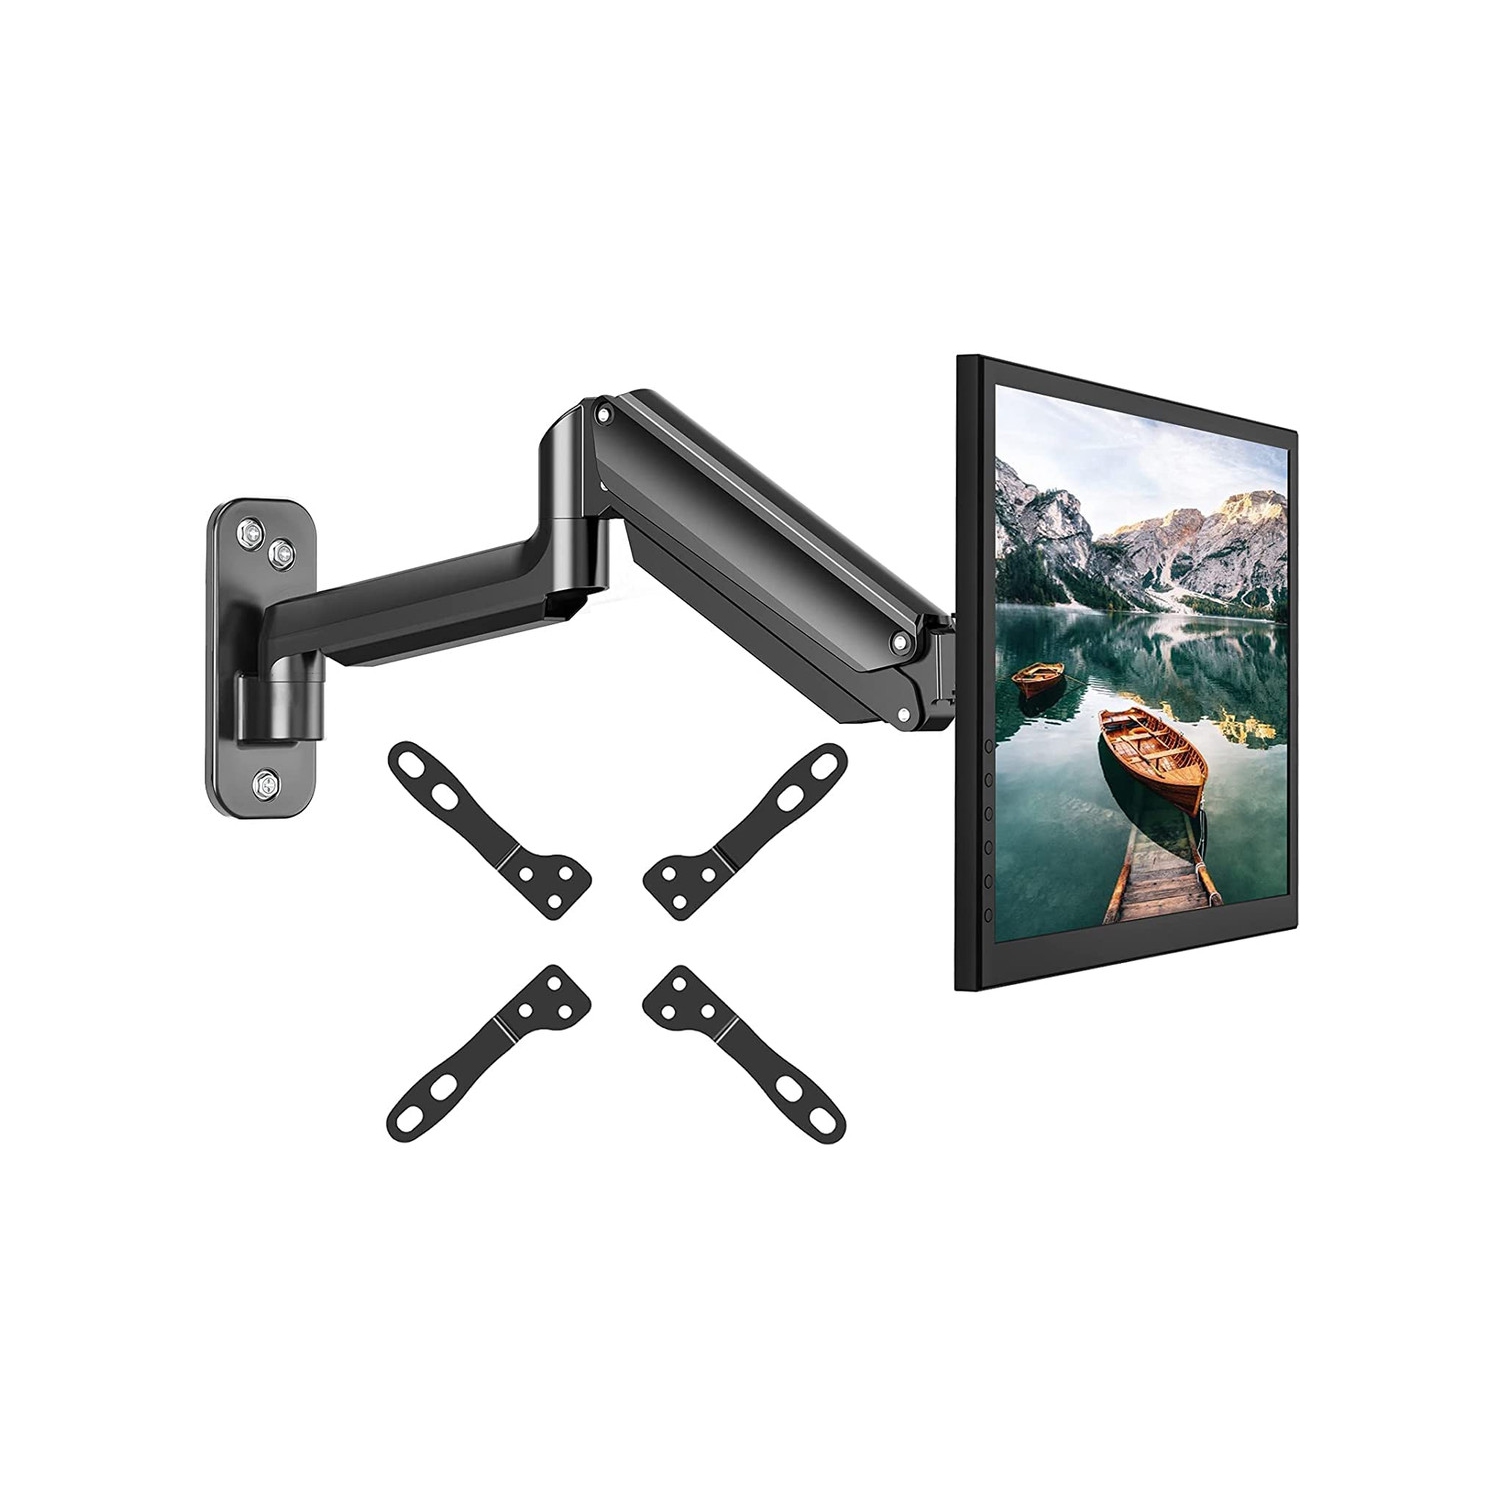 HUANUO Single Arm Monitor Wall Mount with VESA Extension for 17-32 Inch Screens